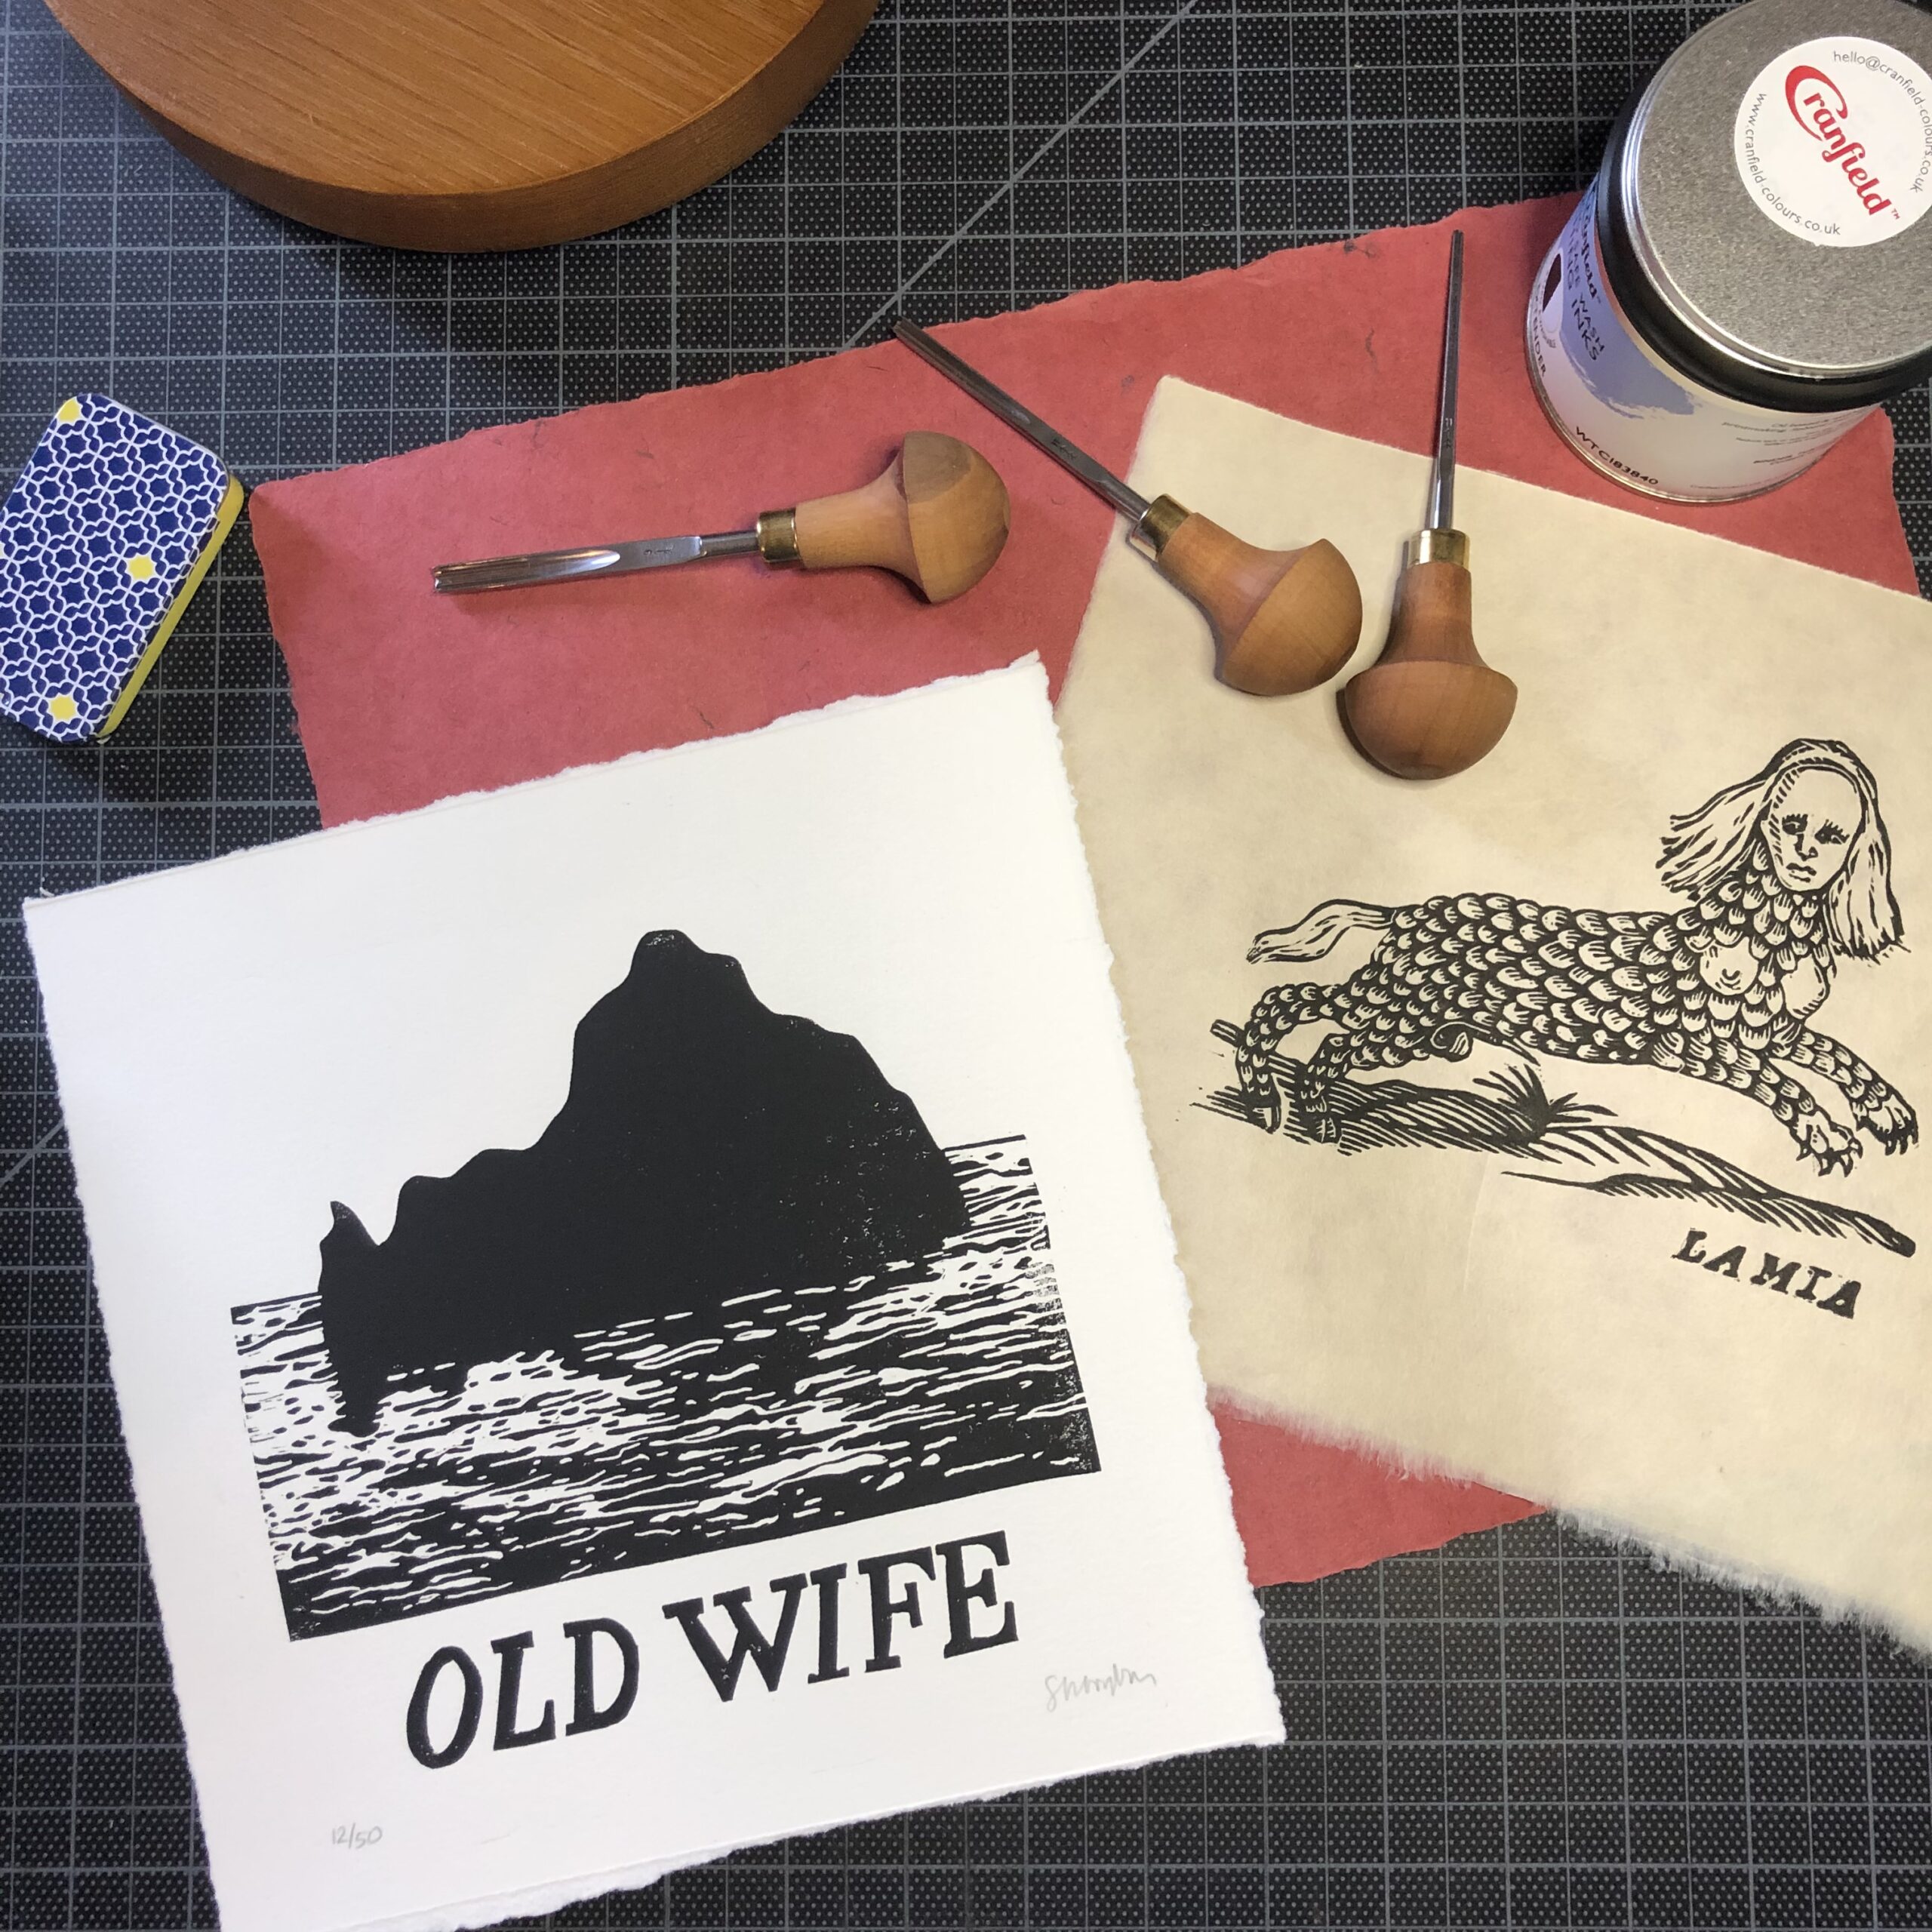 The Lamia linocut print lies on a workbench with carving tools and a jar of Cranfield Colors Safe Wash Ink. The Old Wife linocut print is to the left.